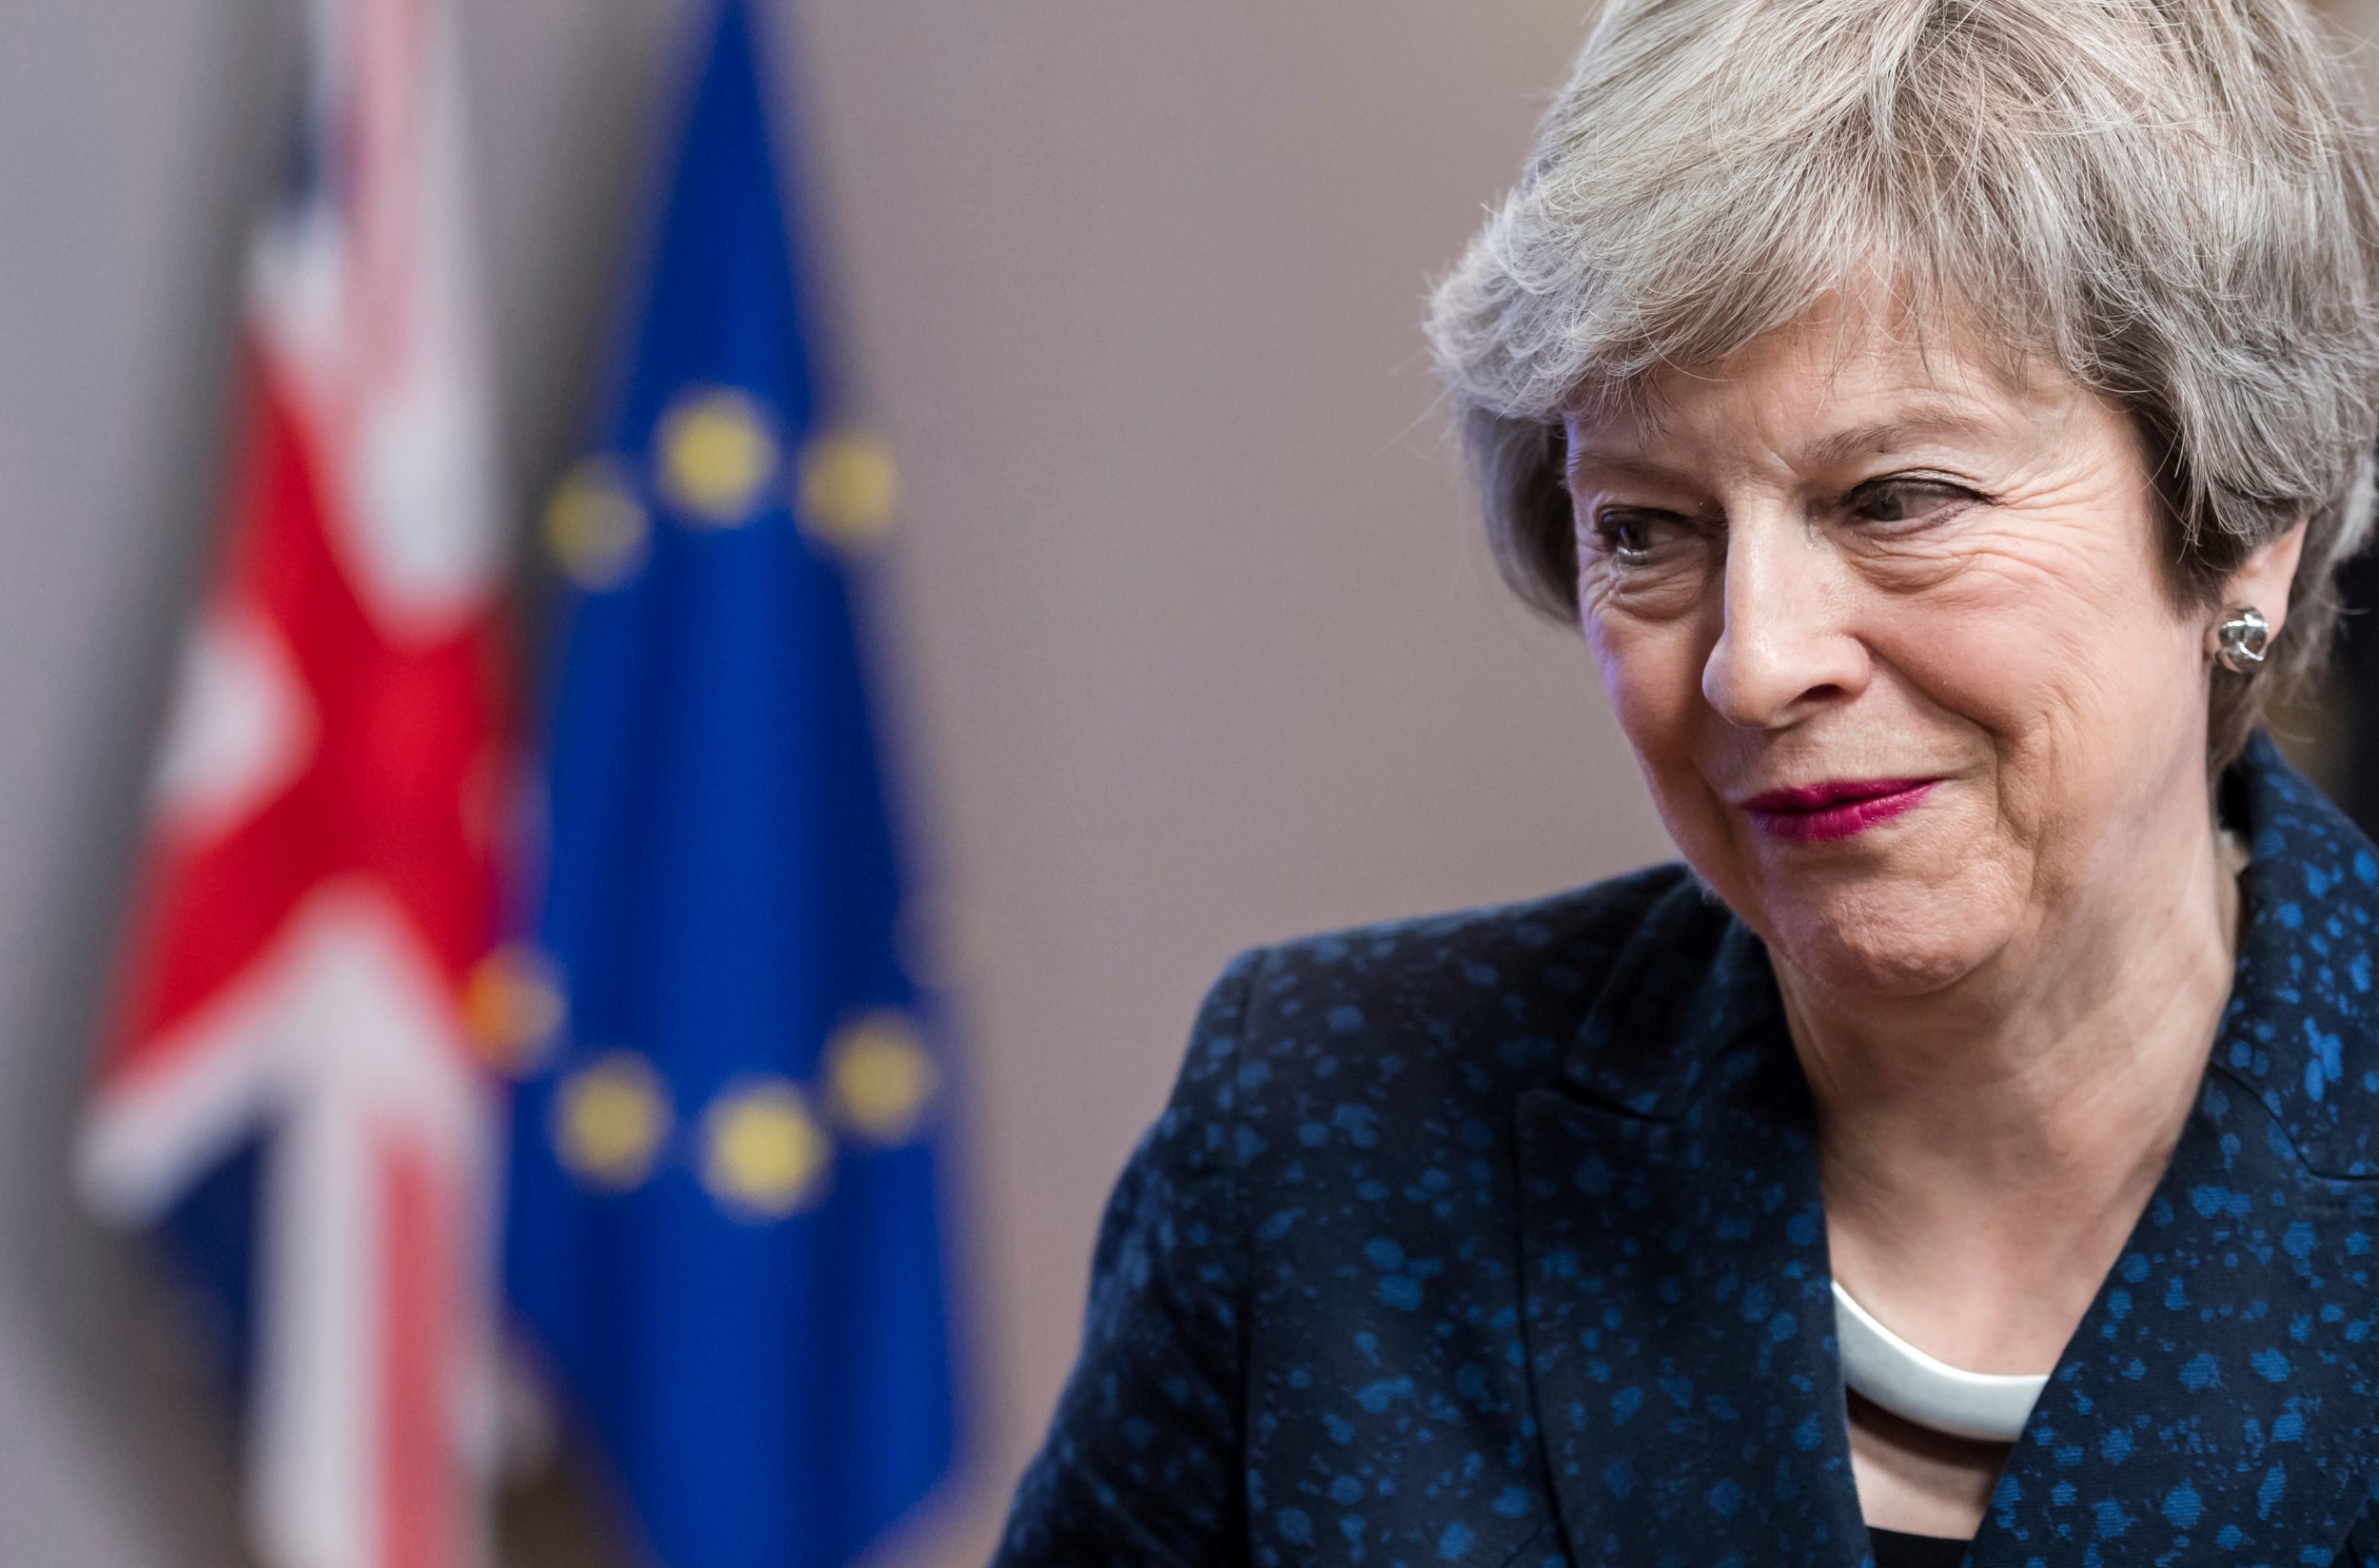 Theresa May has insisted she will deliver Brexit by 29 March